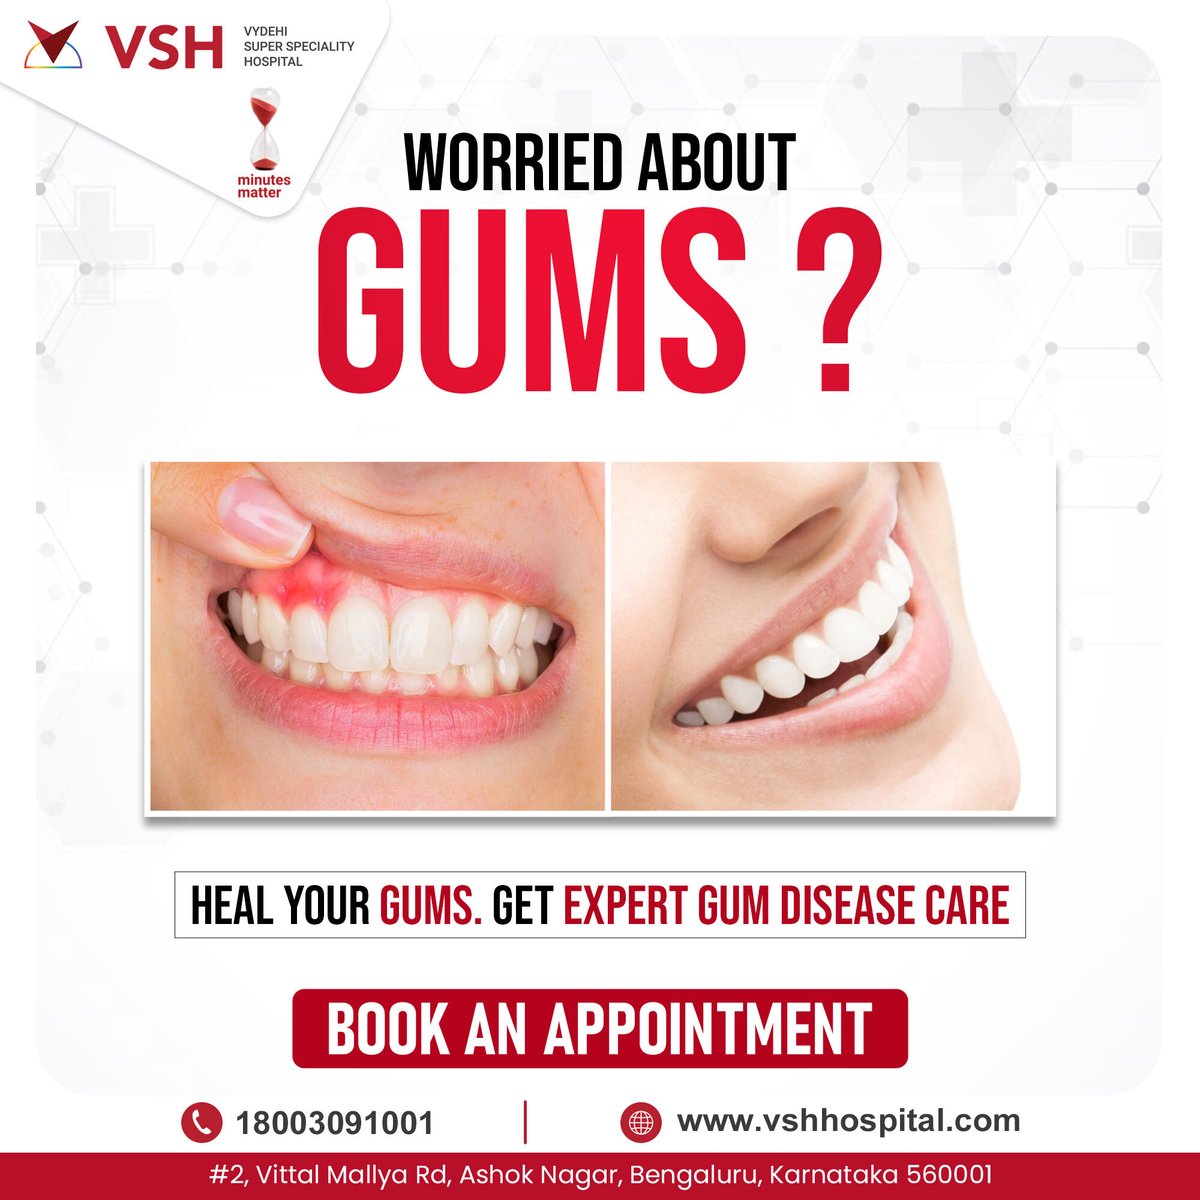 Don't let gum disease win! VSH Hospital's expert team can help you heal your gums & restore your smile. 📷  Get lasting results & a healthier you!  #GumDiseaseTreatment #dentalhealth
#safety #savelife #indianhealth #besthospitalinbangalore #superspecialityhospital #vsh